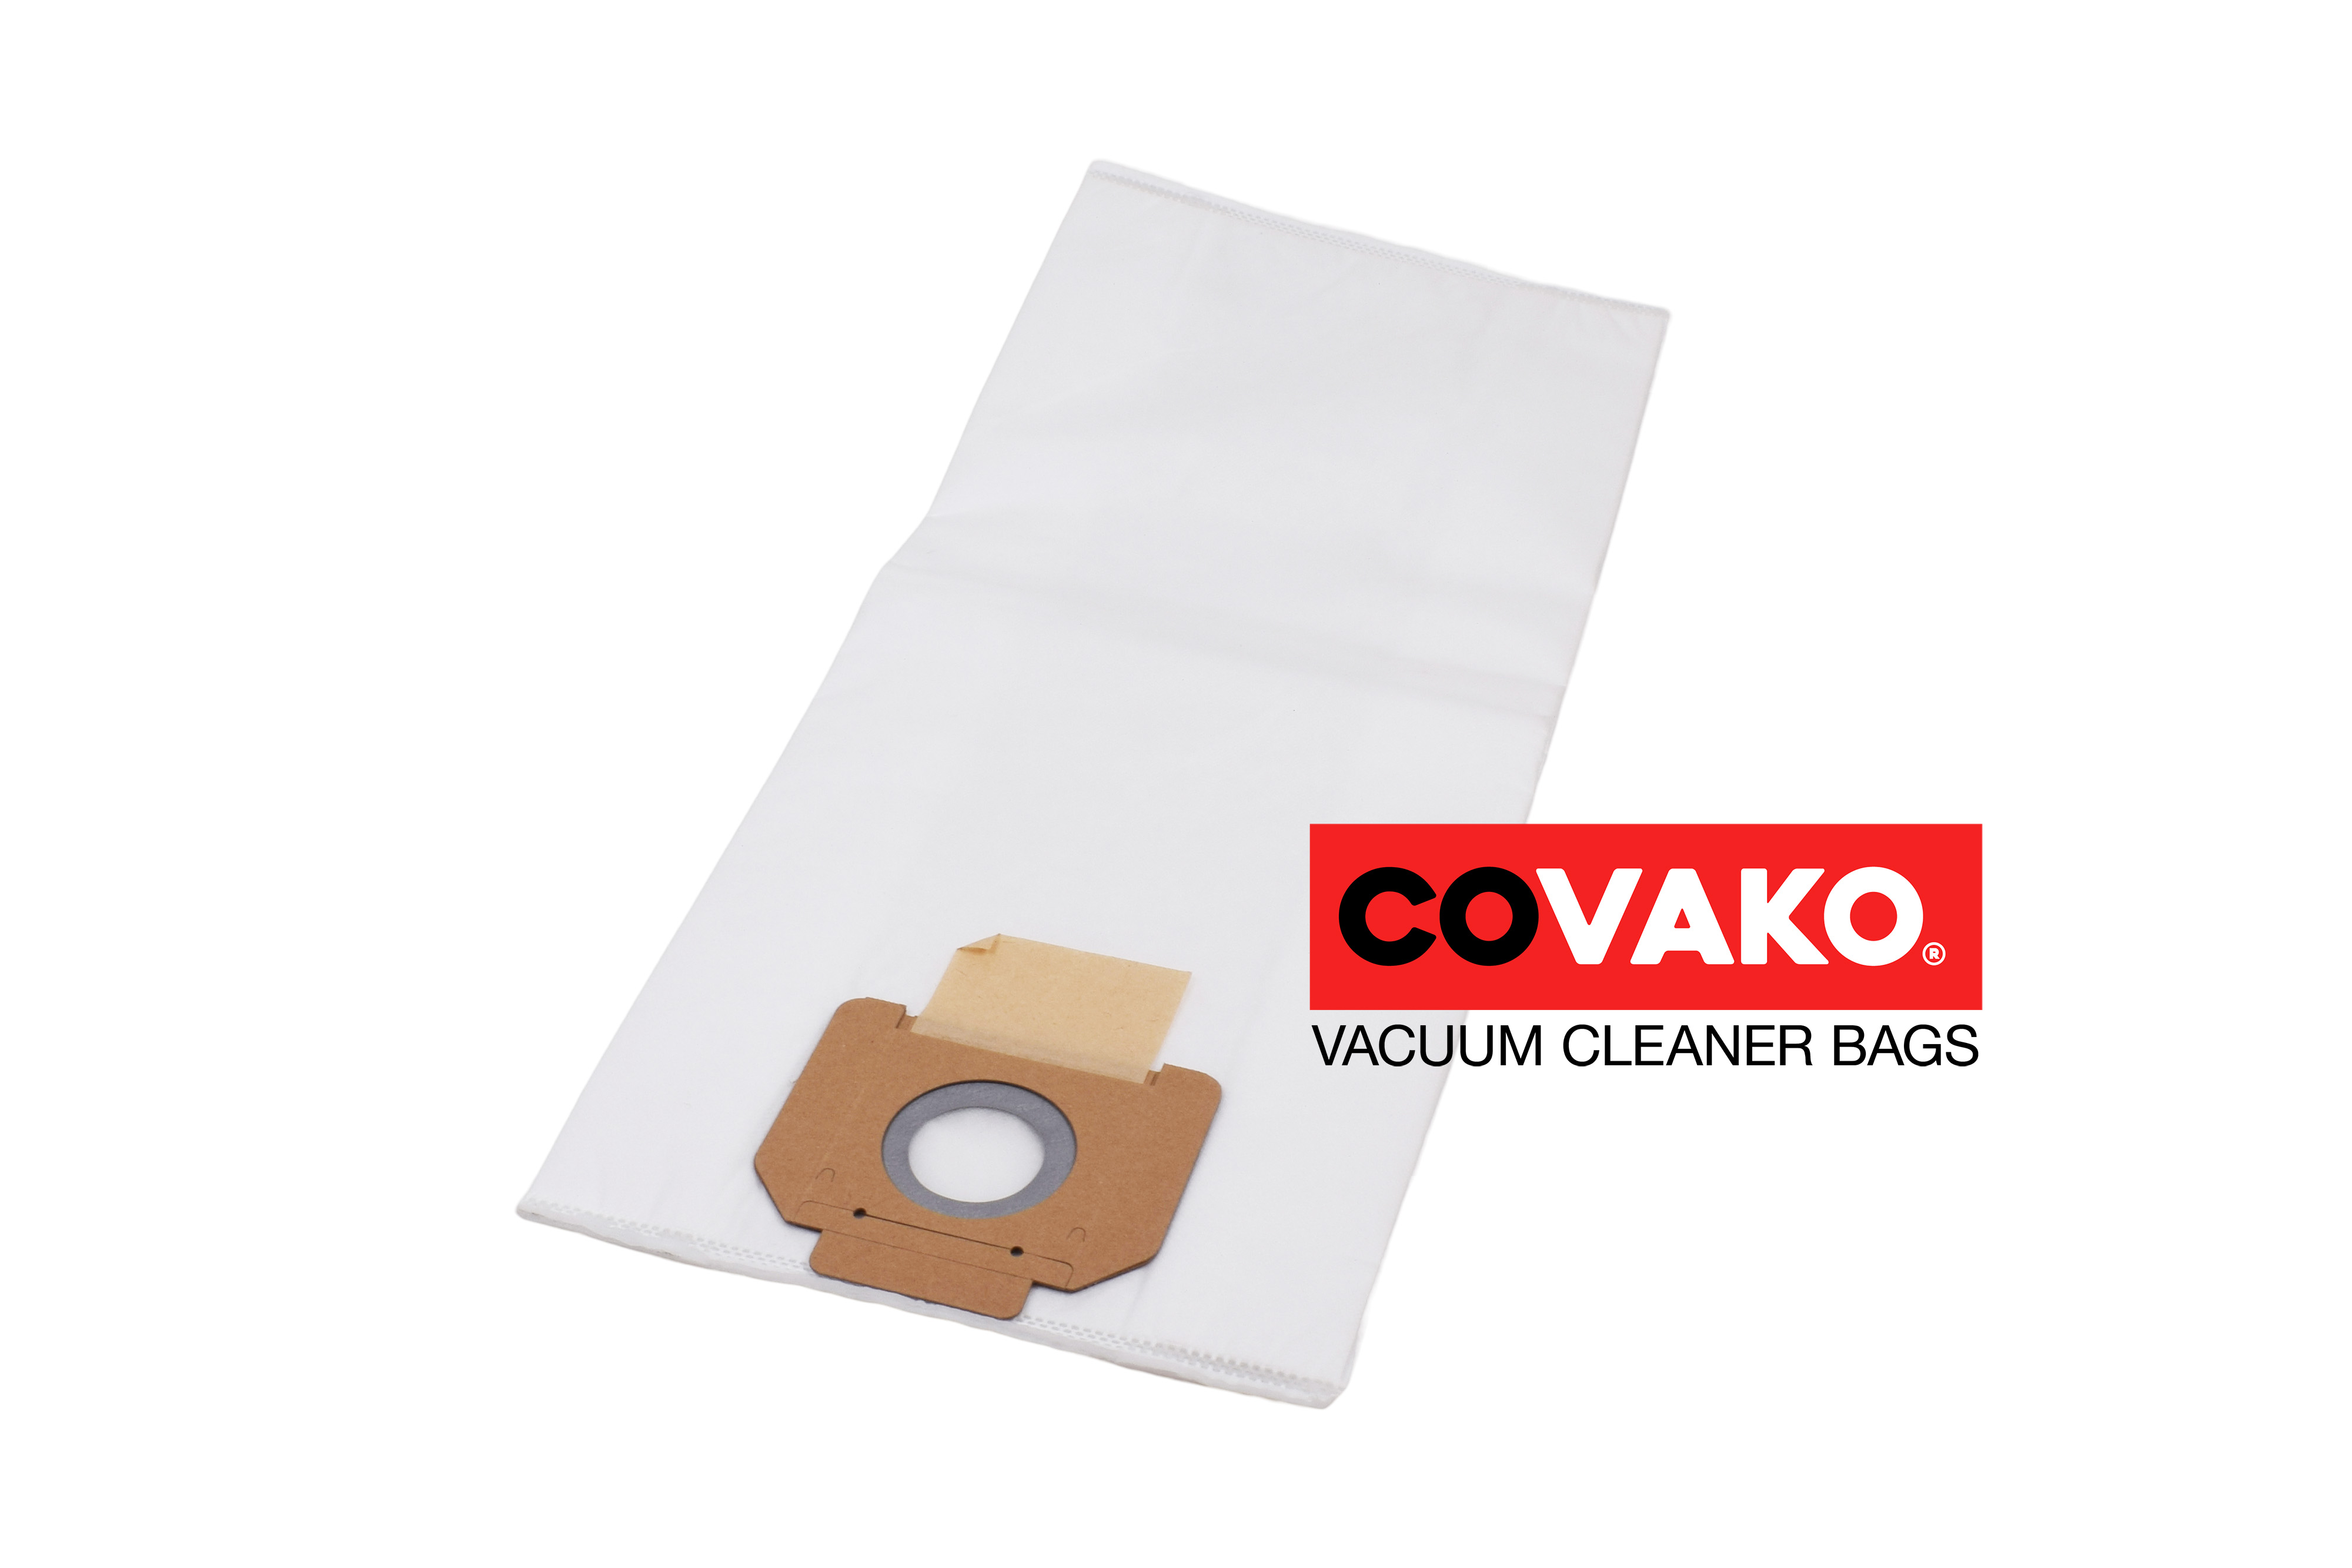 Cleancraft wetCat 362 IET / Synthesis - Cleancraft vacuum cleaner bags